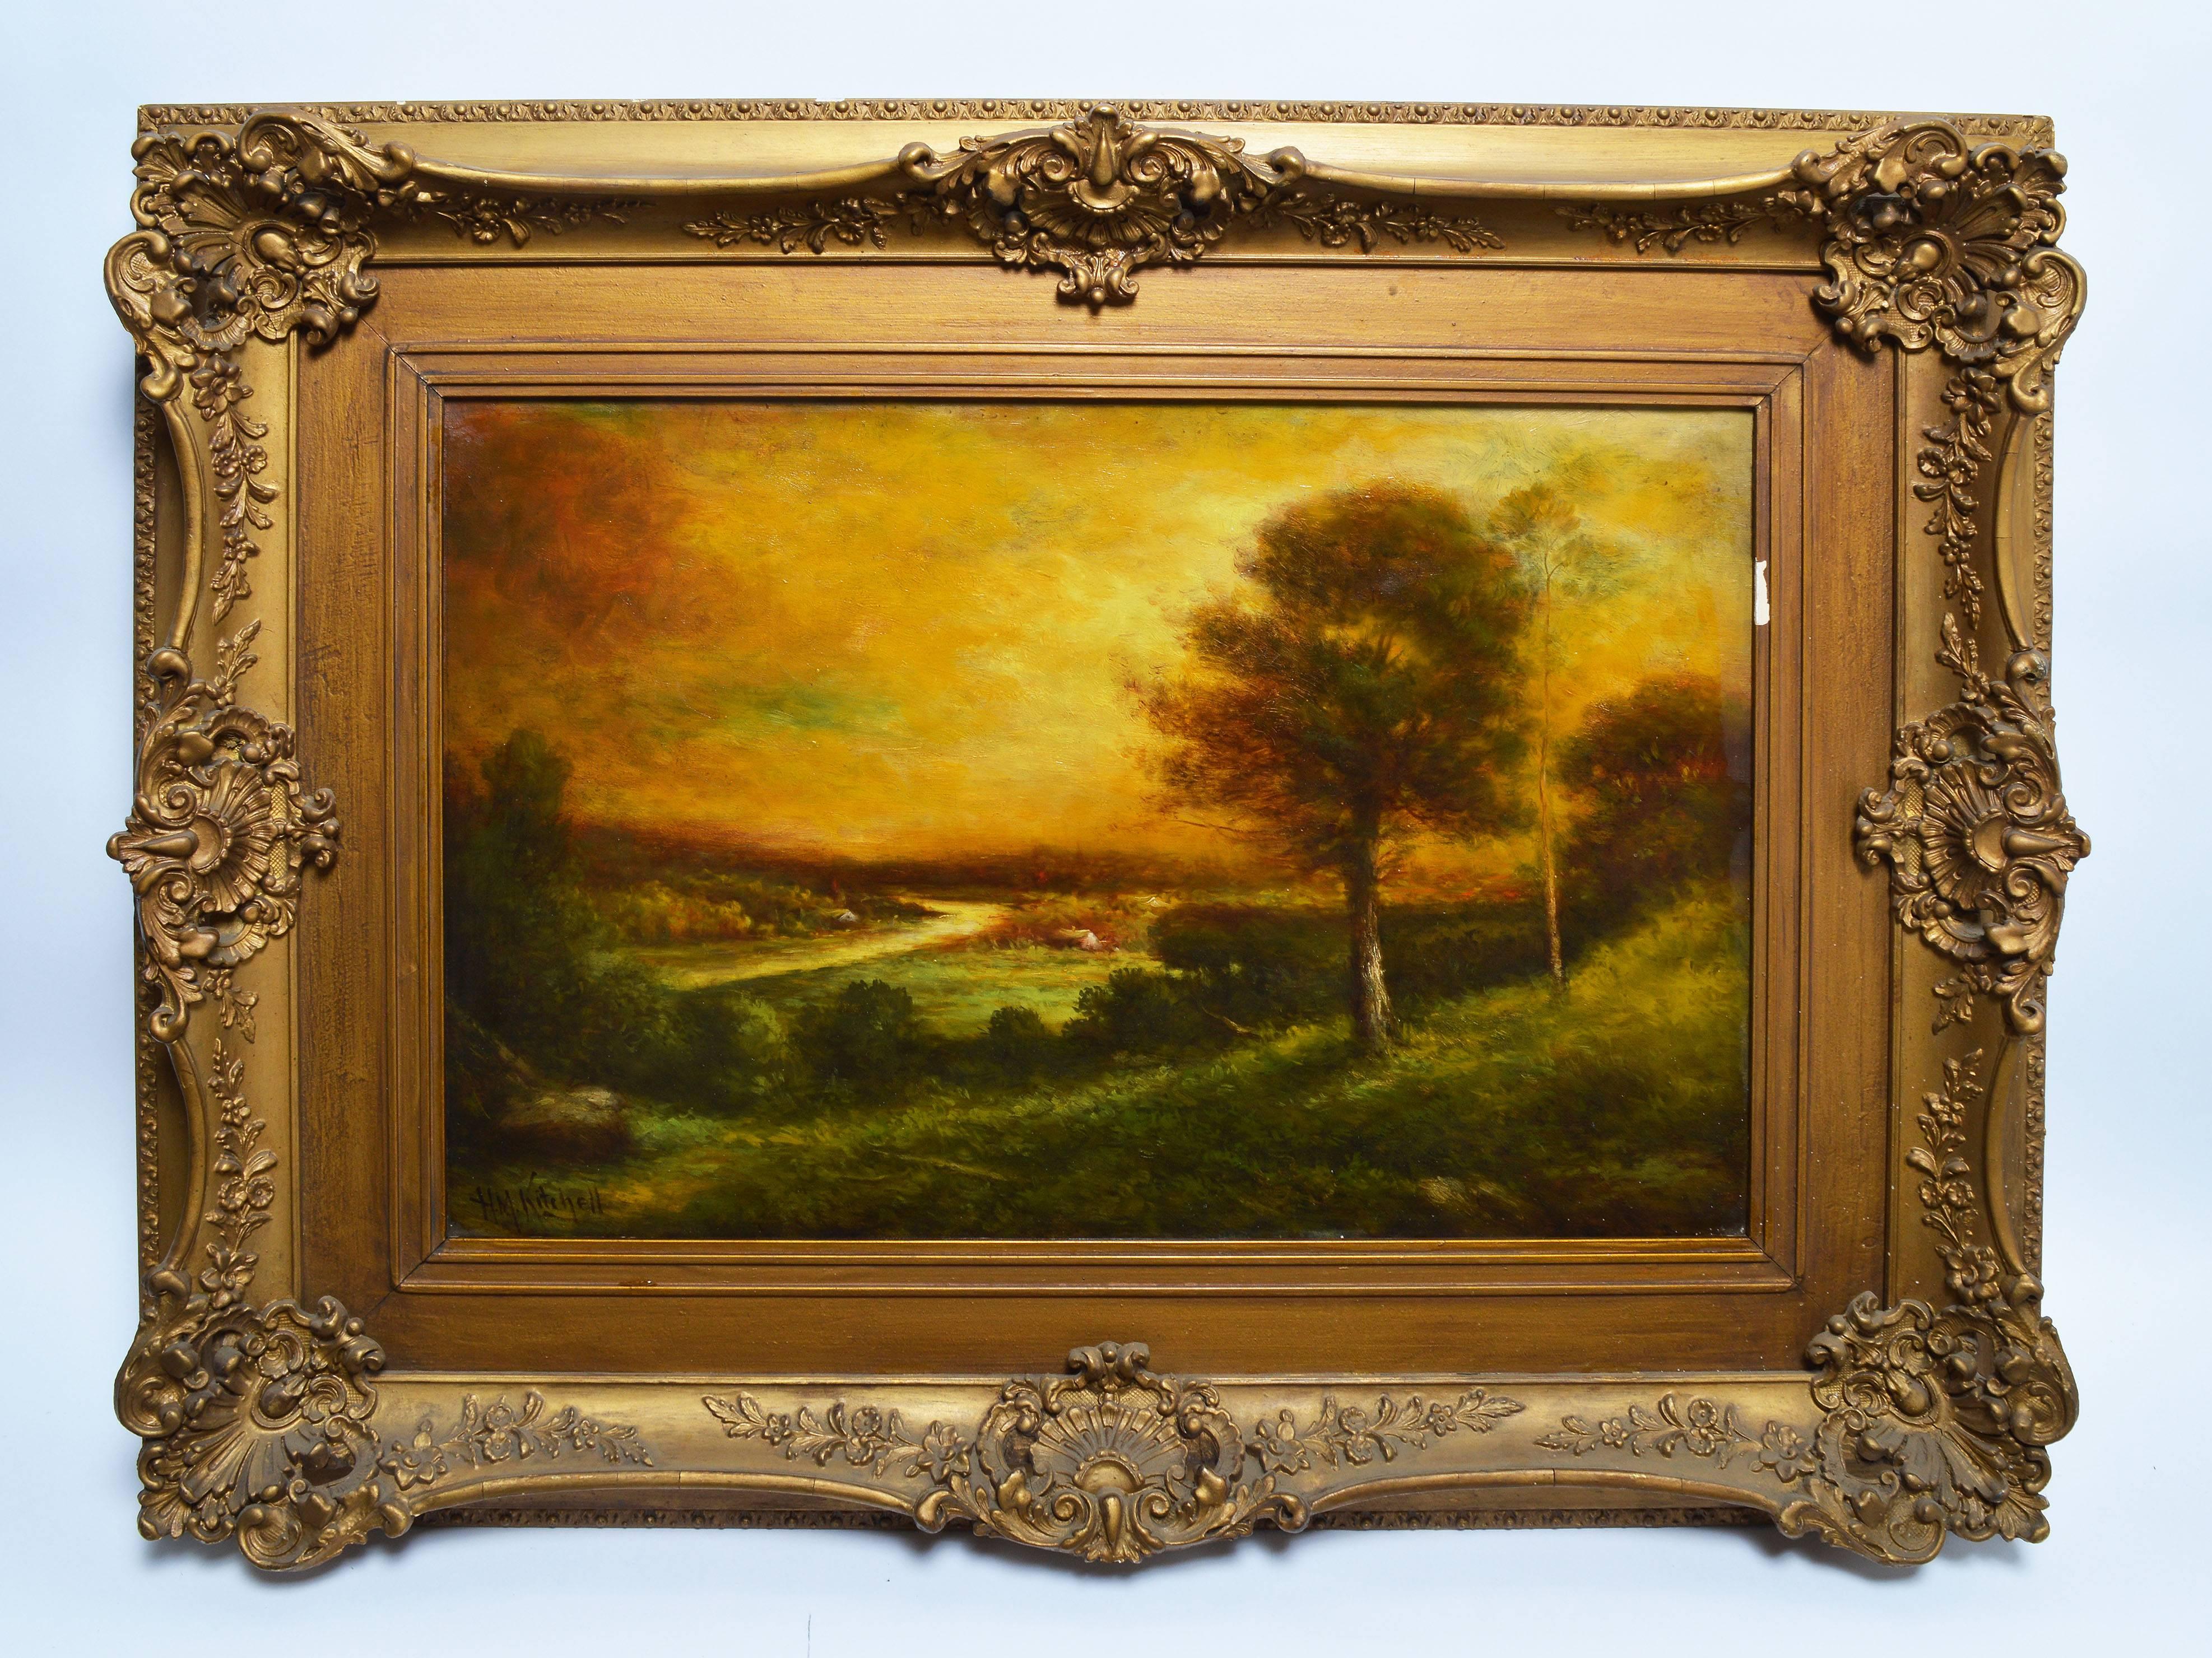 Hudson River School Landscape with a Luminous Sunset by Hudson Kitchell - Painting by Hudson Mindell Kitchell